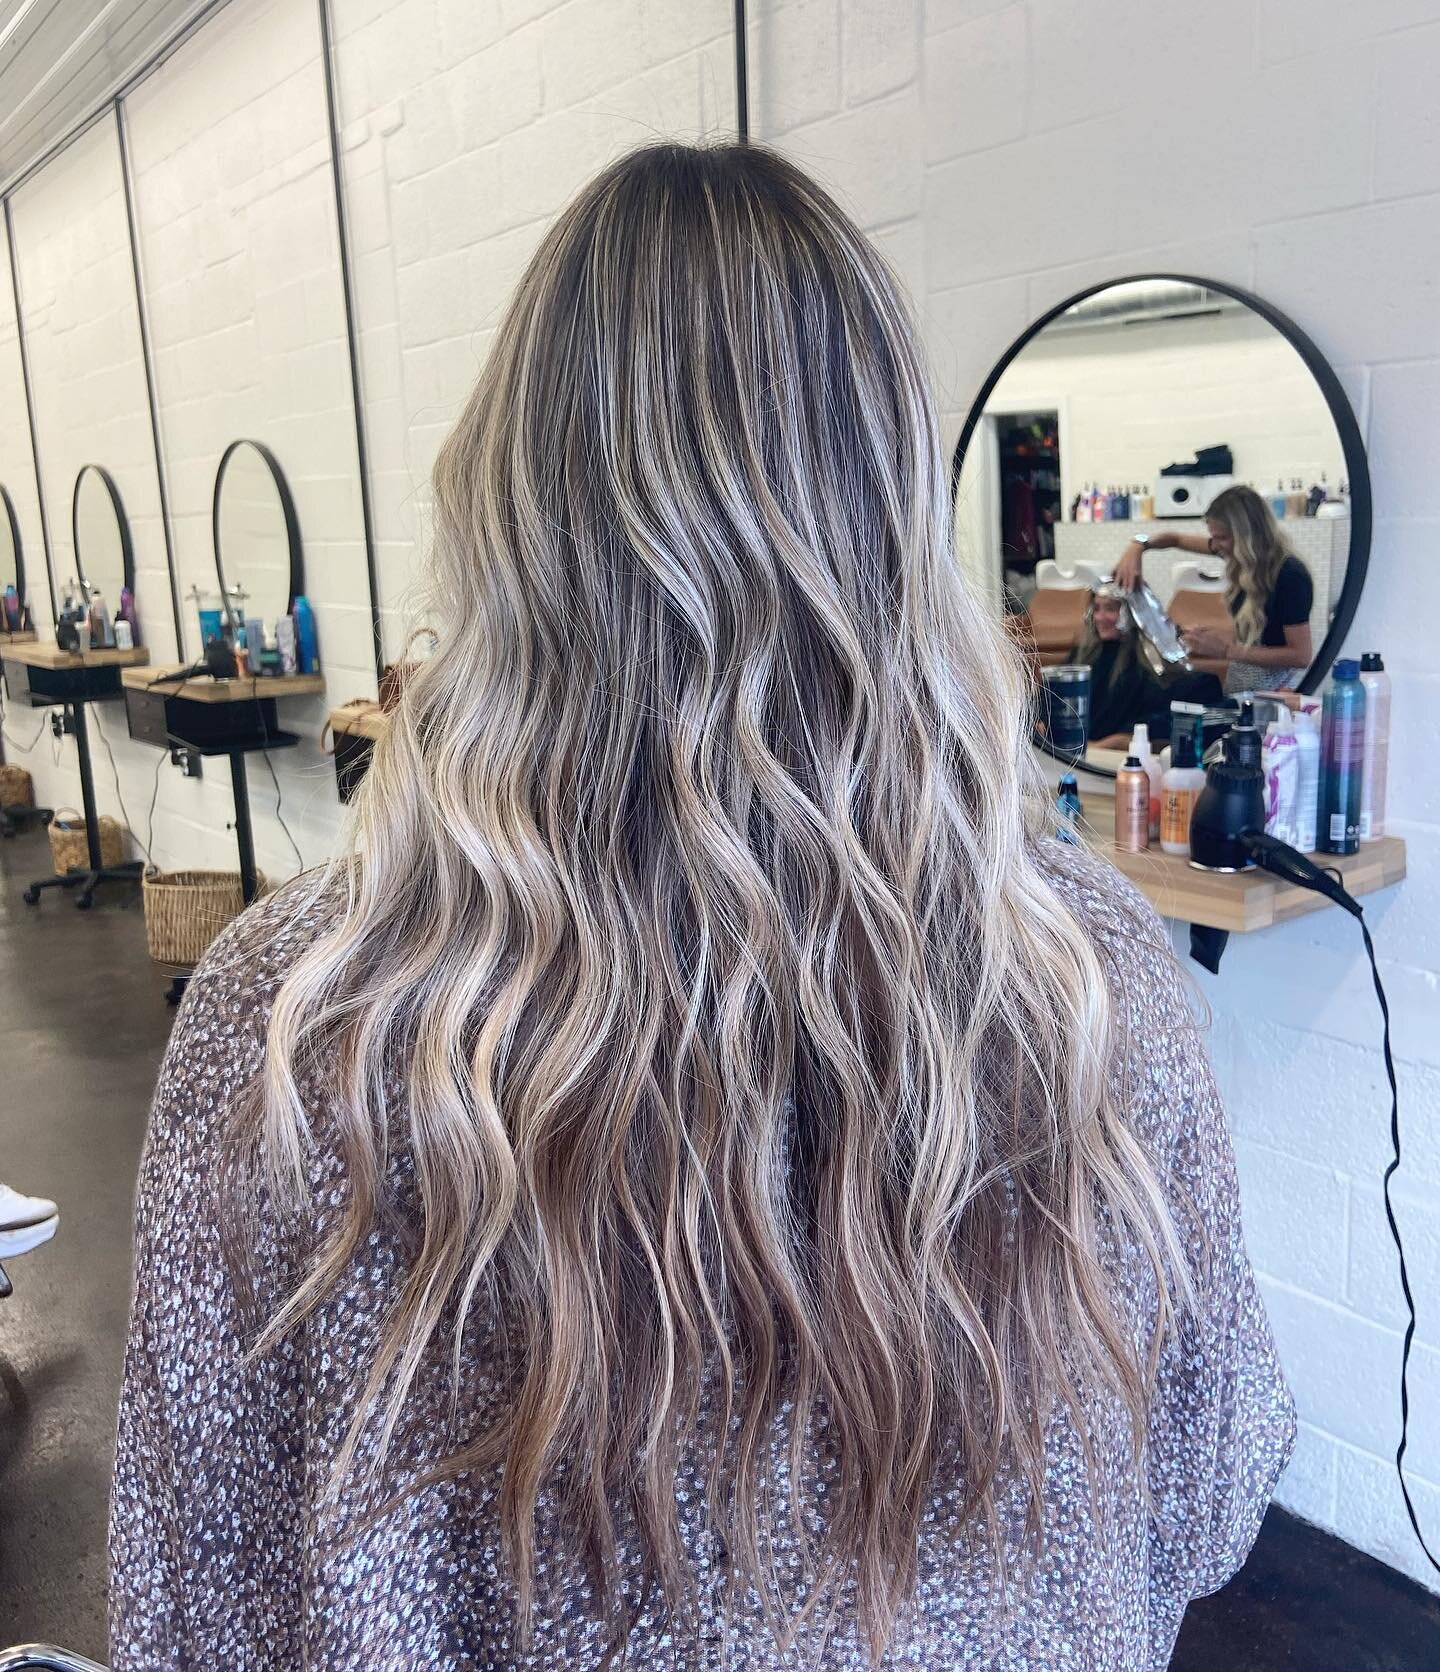 ☀️🌊 Summer hair 

Partial teasy foil by @heatherschair no gloss or root tap needed, just lifted &amp; blended to perfection 👌🏽 This is her biannual touch up, lets talk about beautiful low maintenance! 

#balayage #teasylights #beachhair #hhouseofh